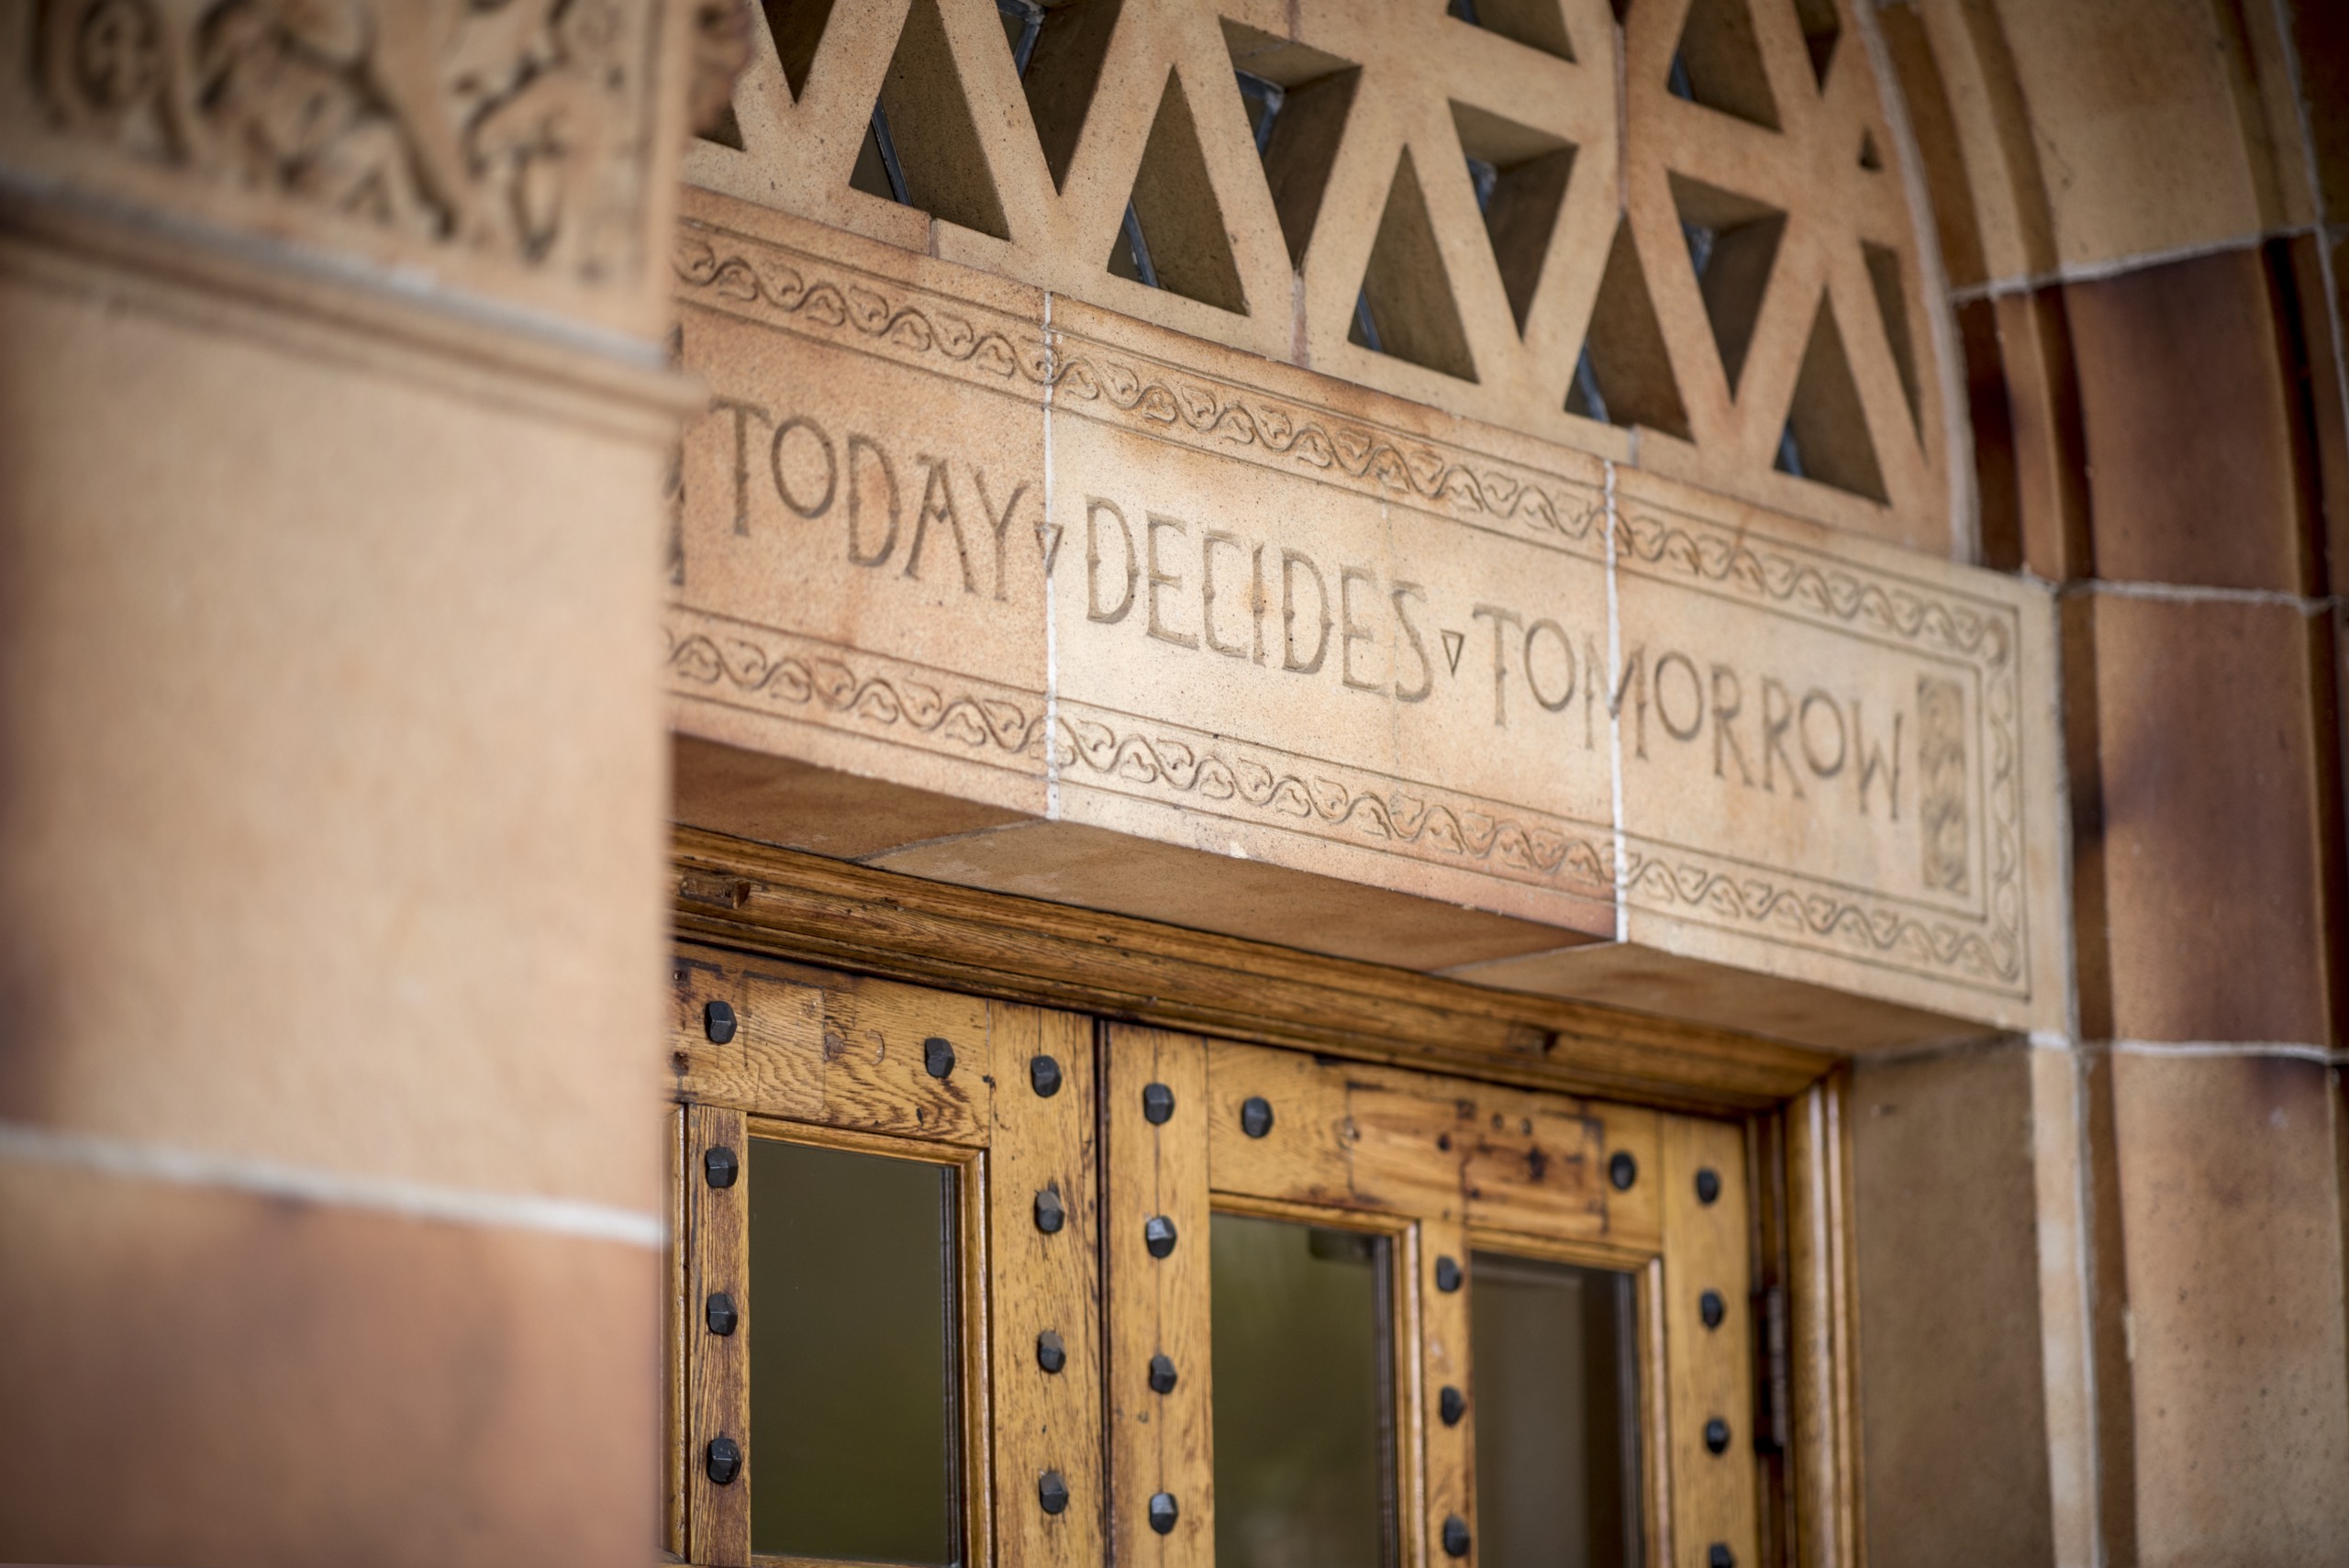 "Today Decides Tomorrow" is read on the Kendall Hall building